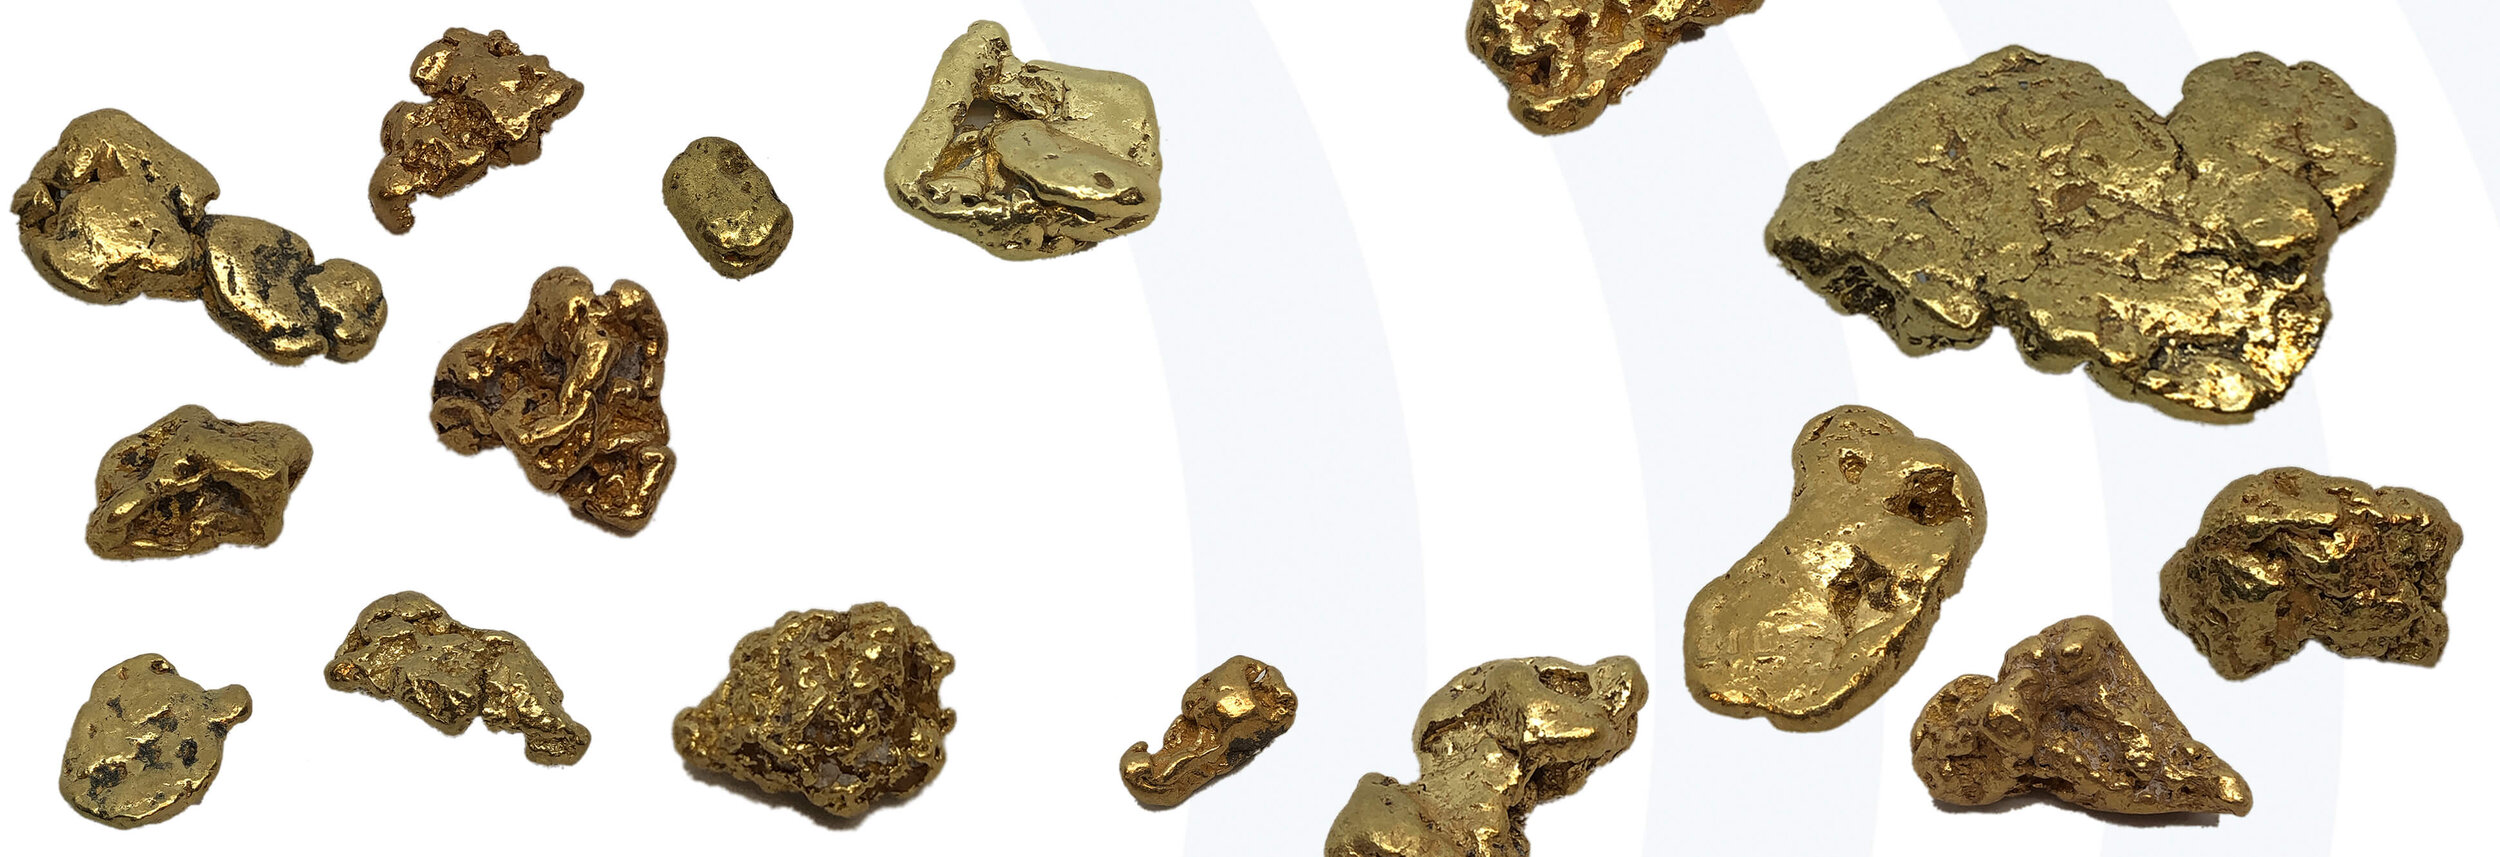 The Best Gold Paydirt on Earth™-Arizona Gold Nuggets, Gold Flakes and Gold  Pickers.